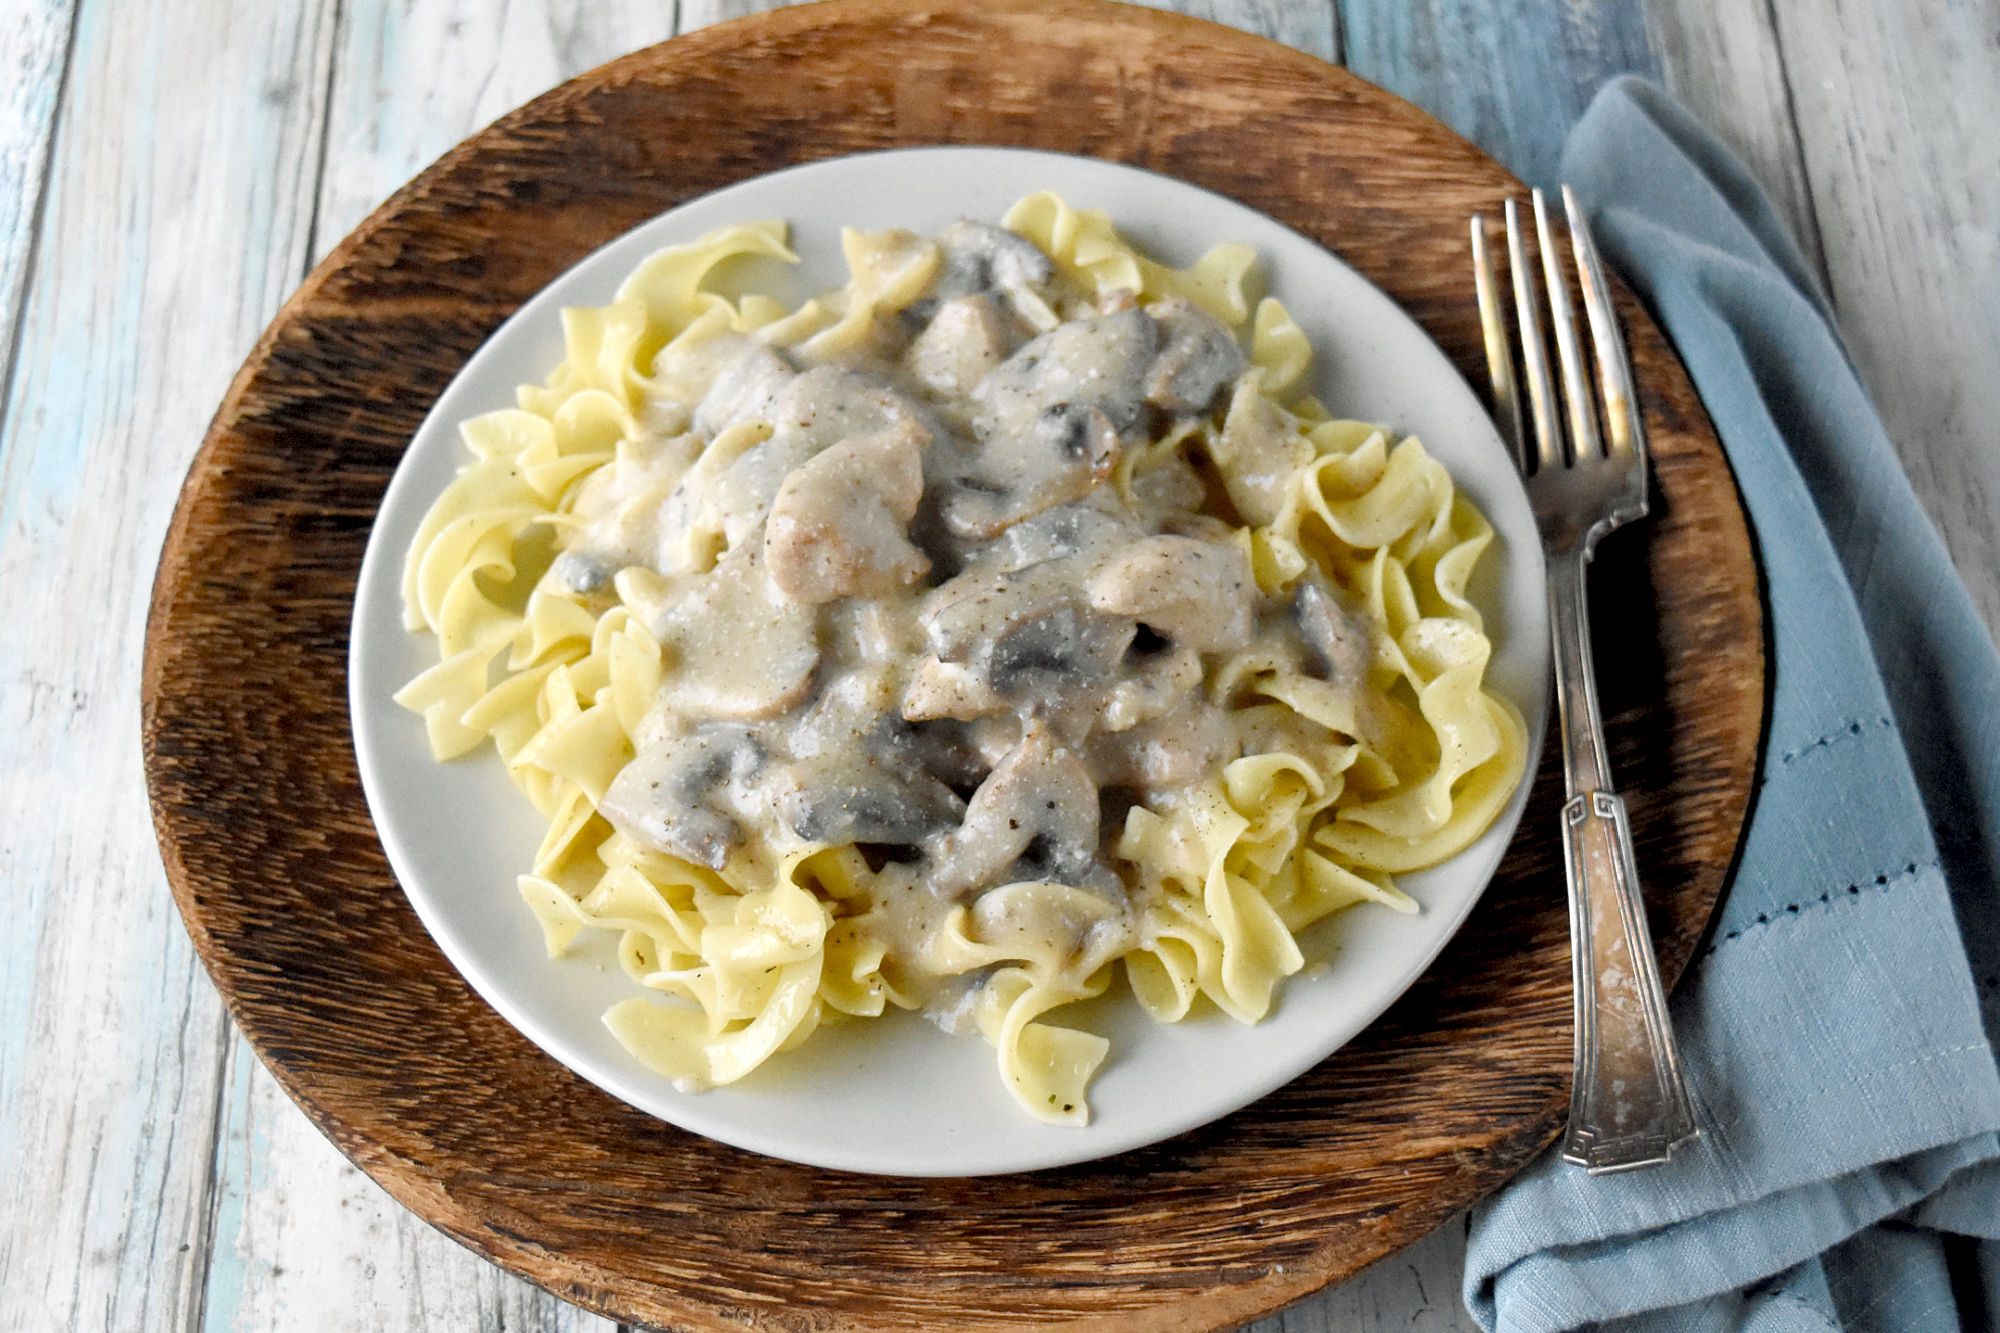 Easy Chicken Stroganoff is inspired by a dish I ate in Bosnia.  It's a delicious recipe your family will love.  And you'll love how easy it is to make! #OurFamilyTable #chickenrecipe #easyrecipe #comfortfood